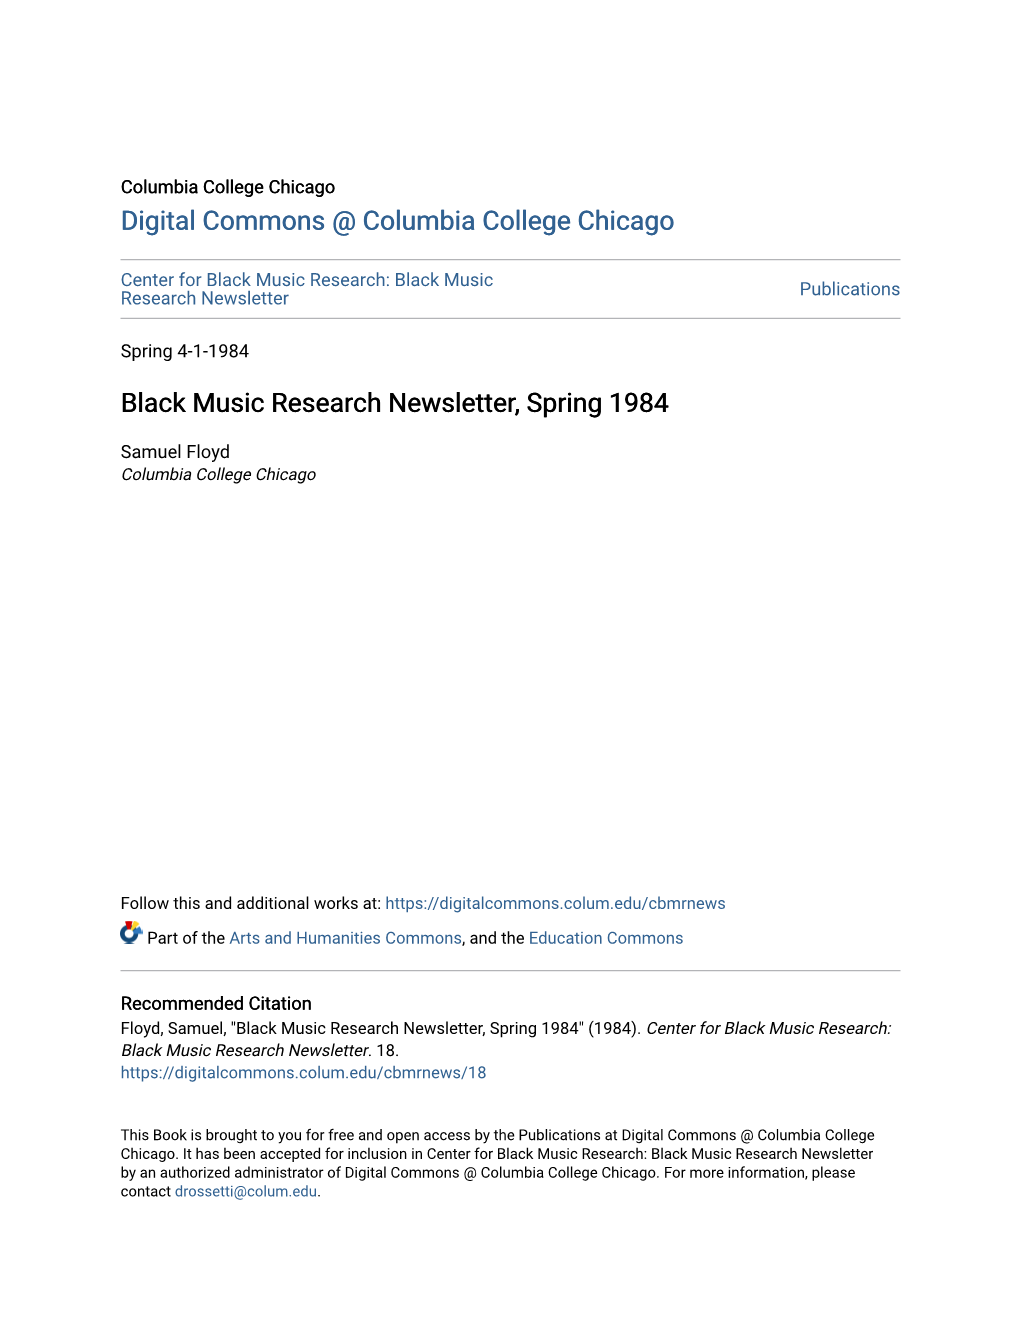 Black Music Research Newsletter, Spring 1984